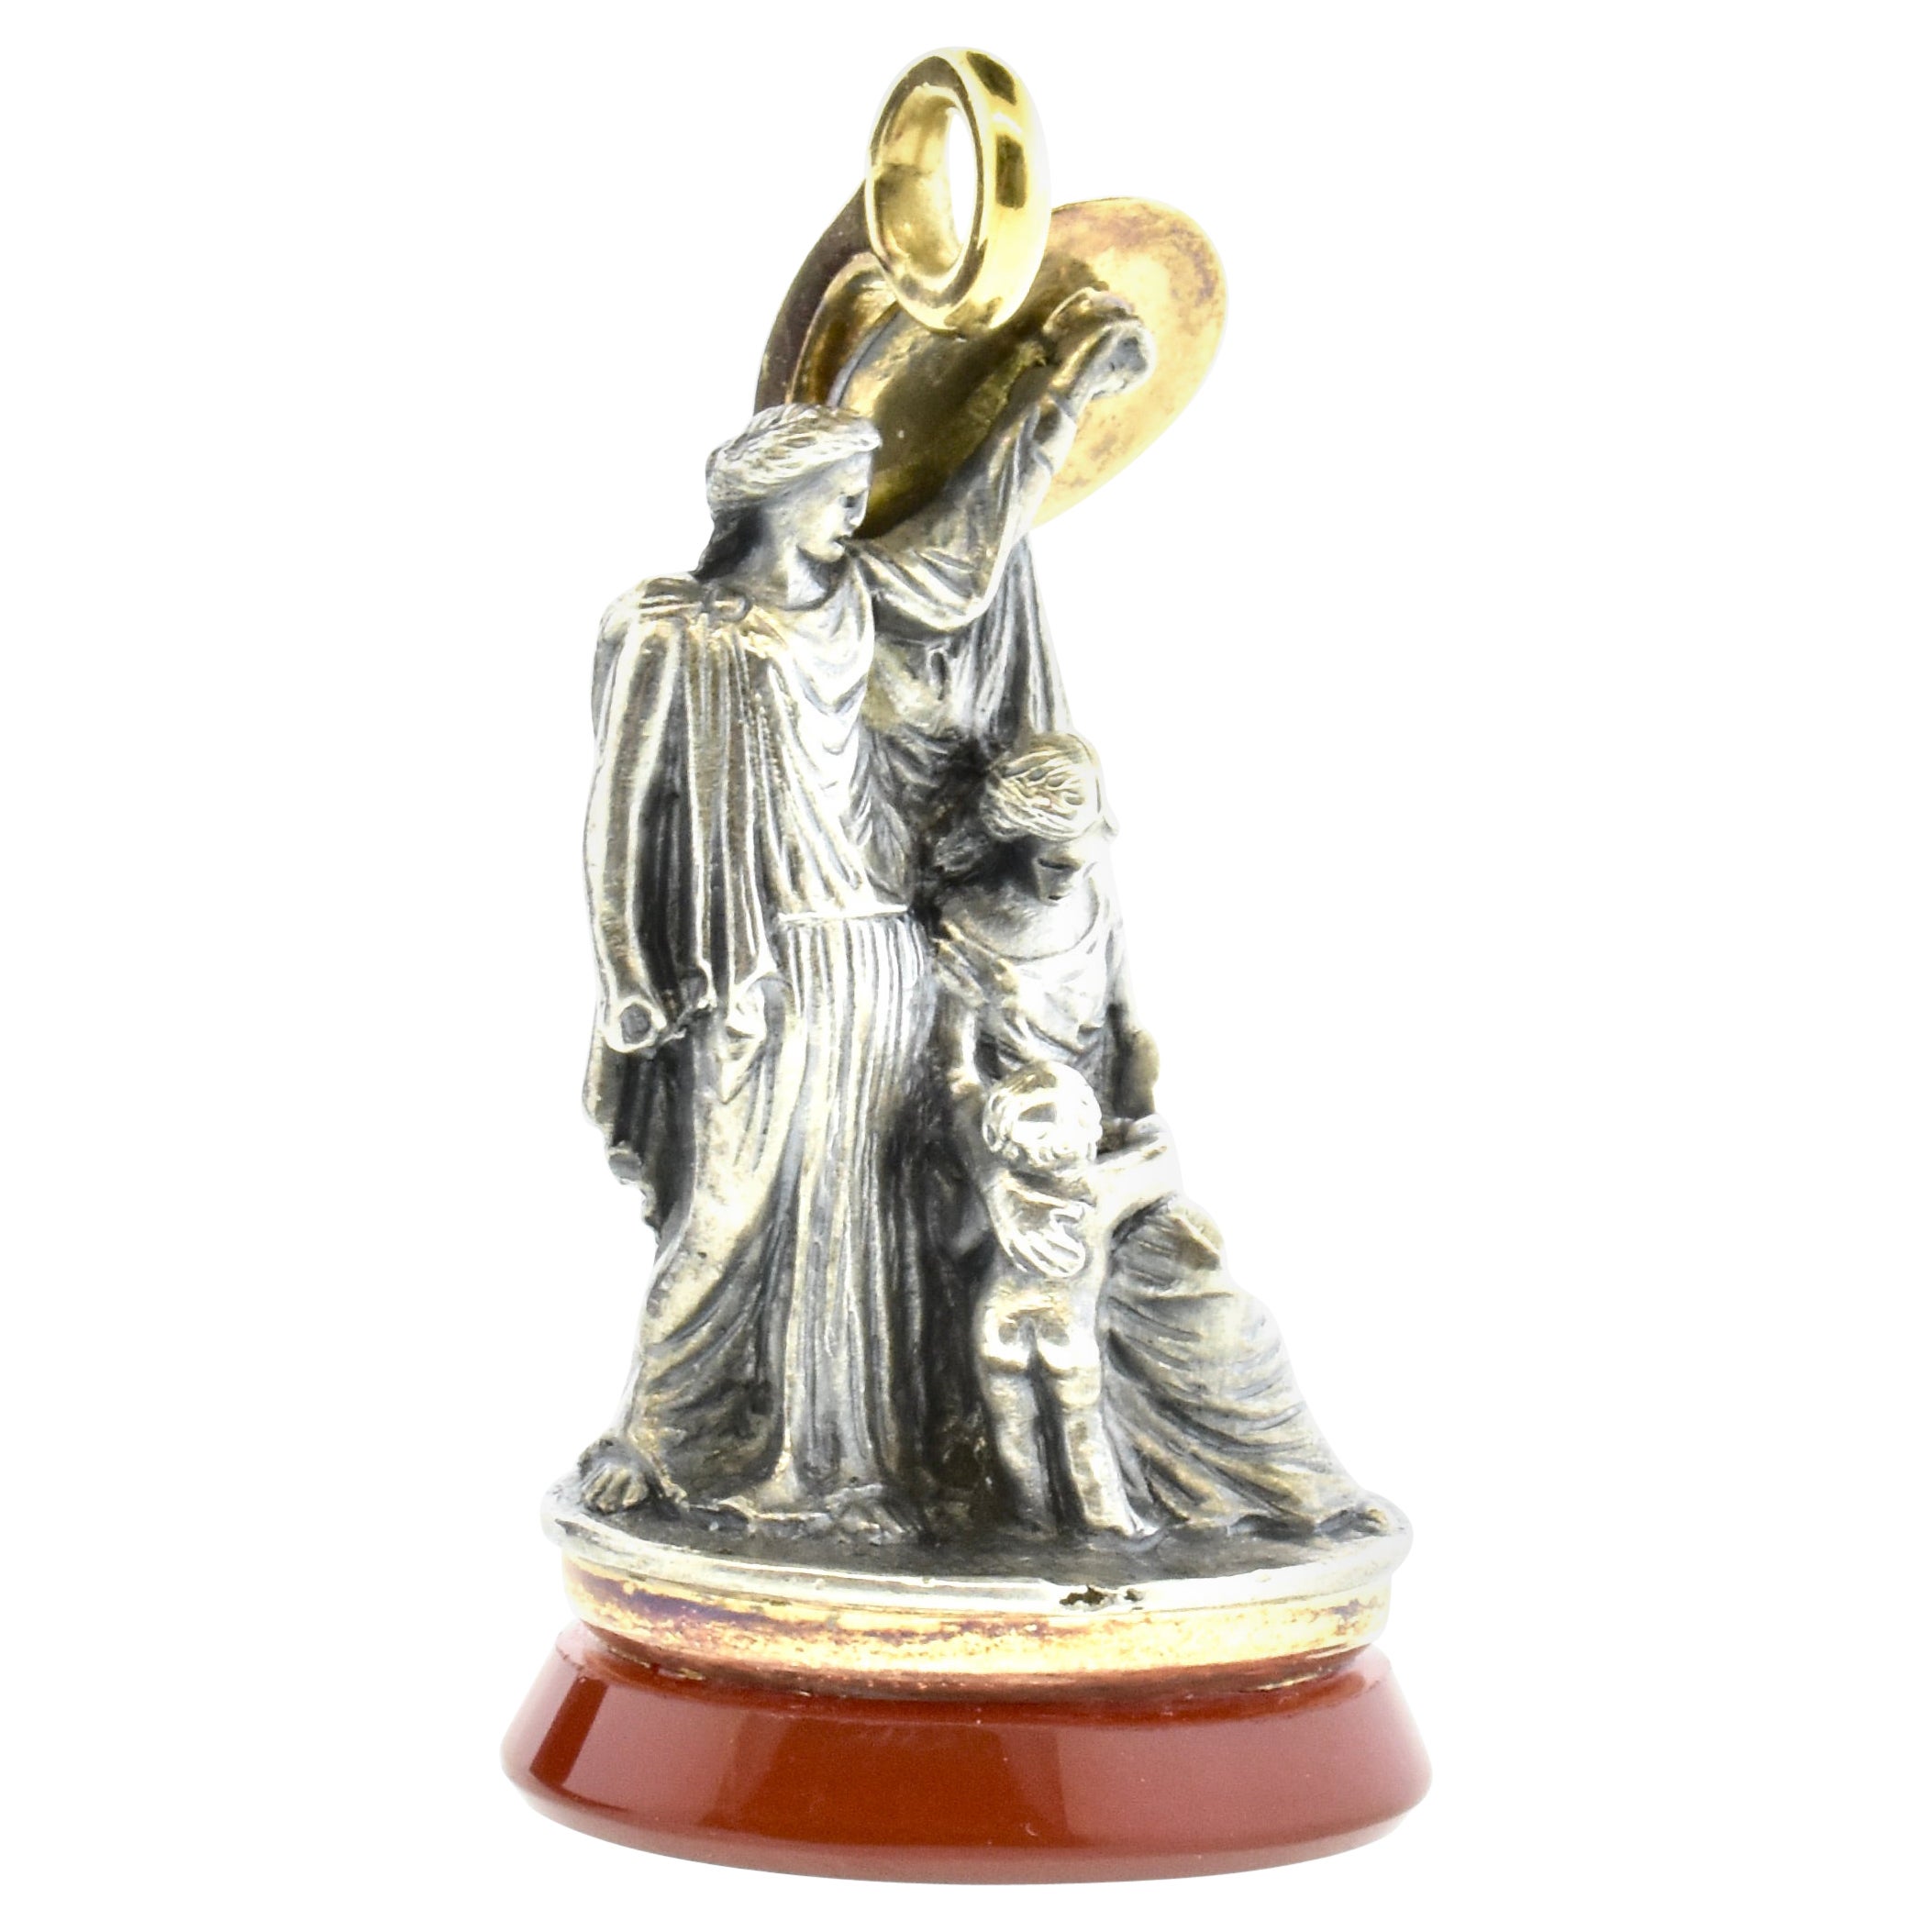 Tiffany & Co antique pendant/fob depicting Perseus son of Zeus, slayer of Medusa and protector of the Good (in this case a mother and child).  He is shielding them from the rigors of life in this world.
Silver, gold and a virgin carnelian seal, this